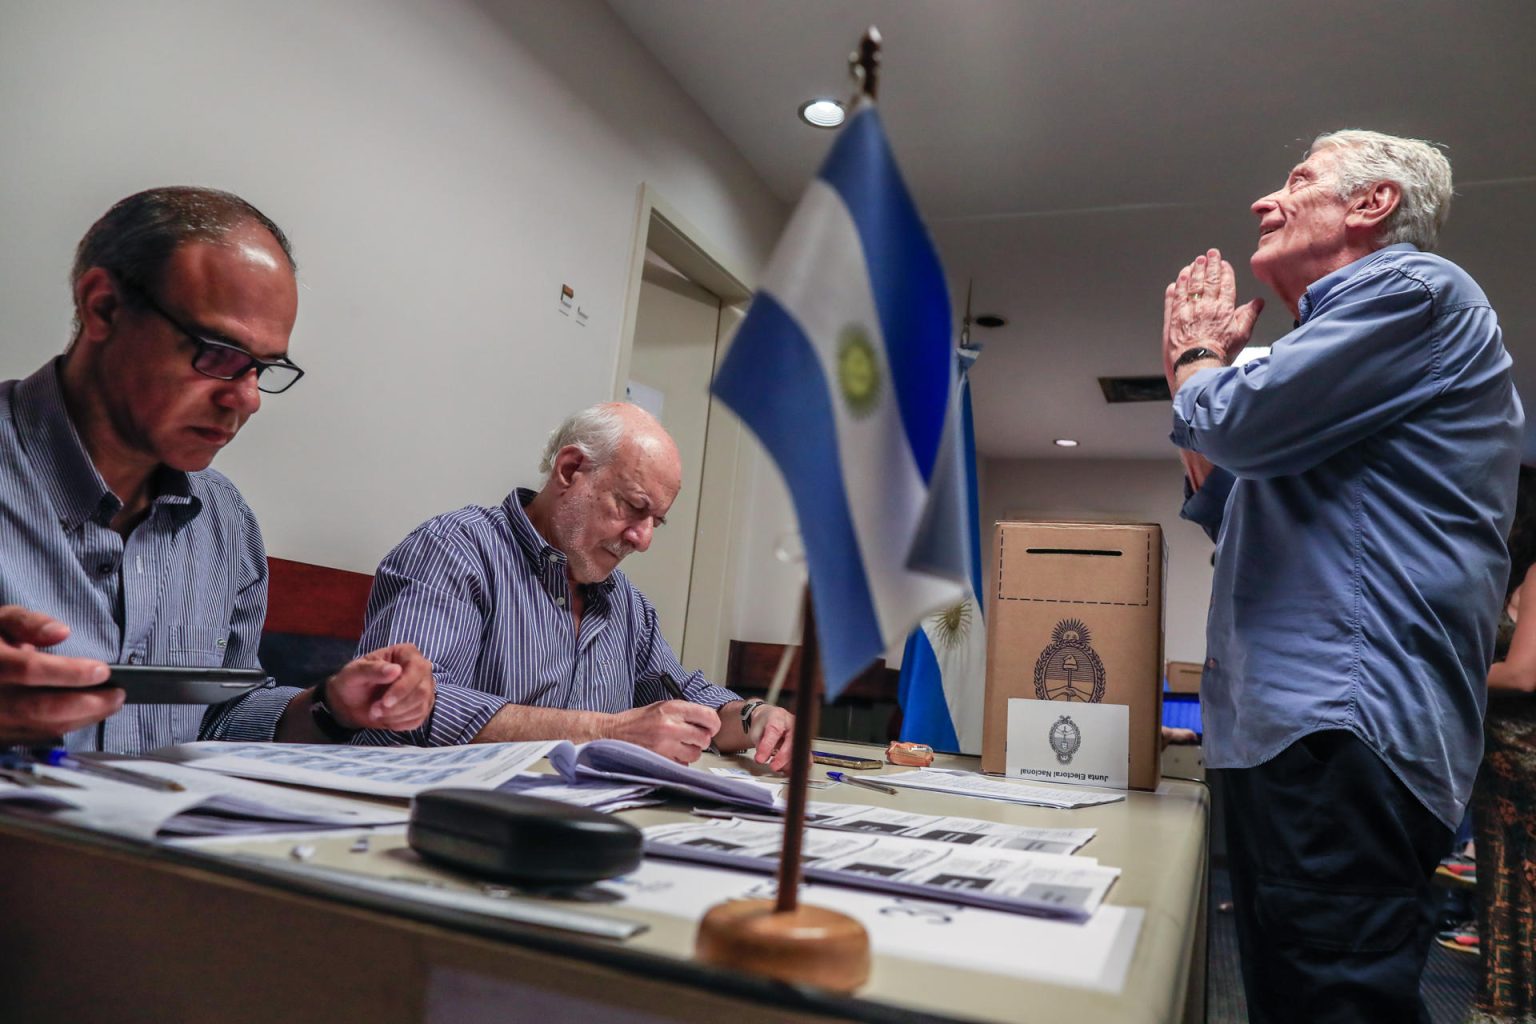 General elections in Argentina